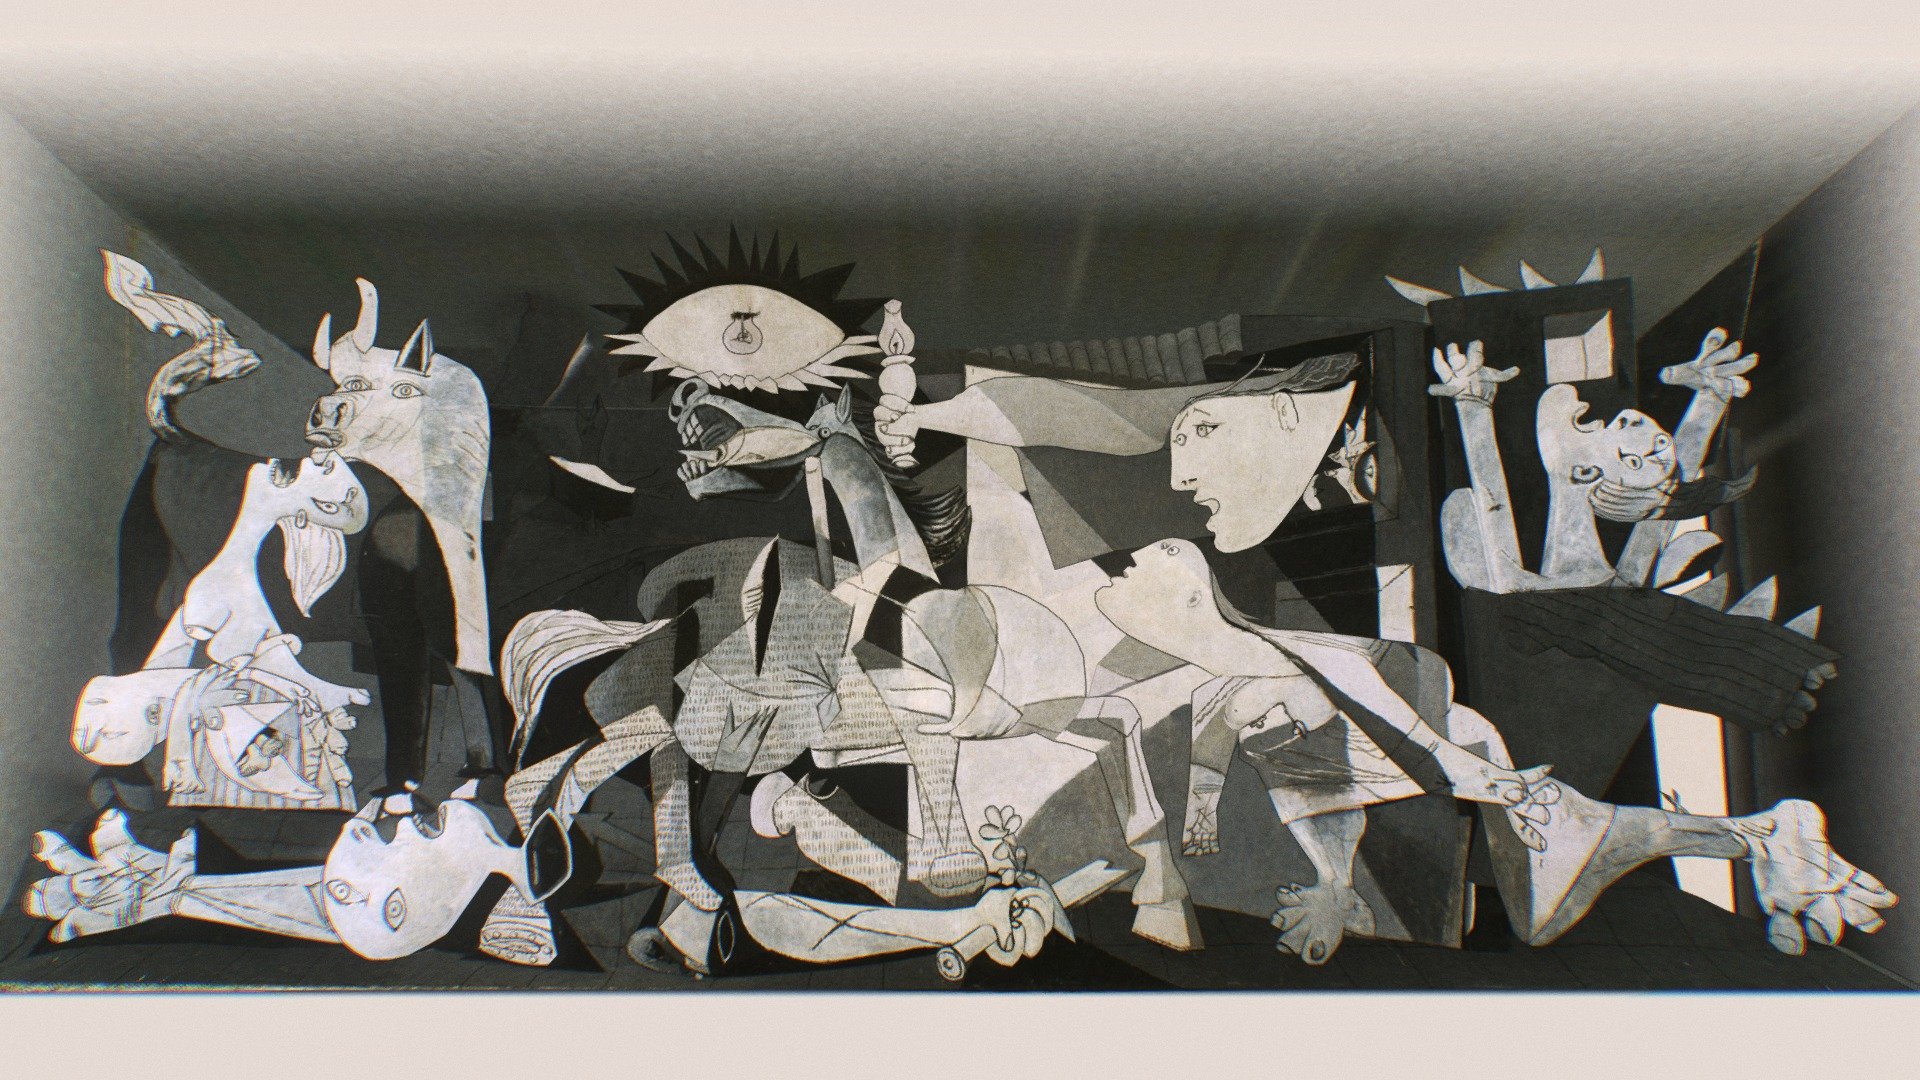 This is a tribute to Pablo Picasso (1881-1973)'s most famous artwork, Guernica (1937).

The main reason to do this is to echo Picasso's antiwar message, which I strongly believe is needed more than ever.

The backside of this artwork I added a few other Picasso's artworks to advocate peace, however washed out and fragmented it is. The ox, the &ldquo;sleeping